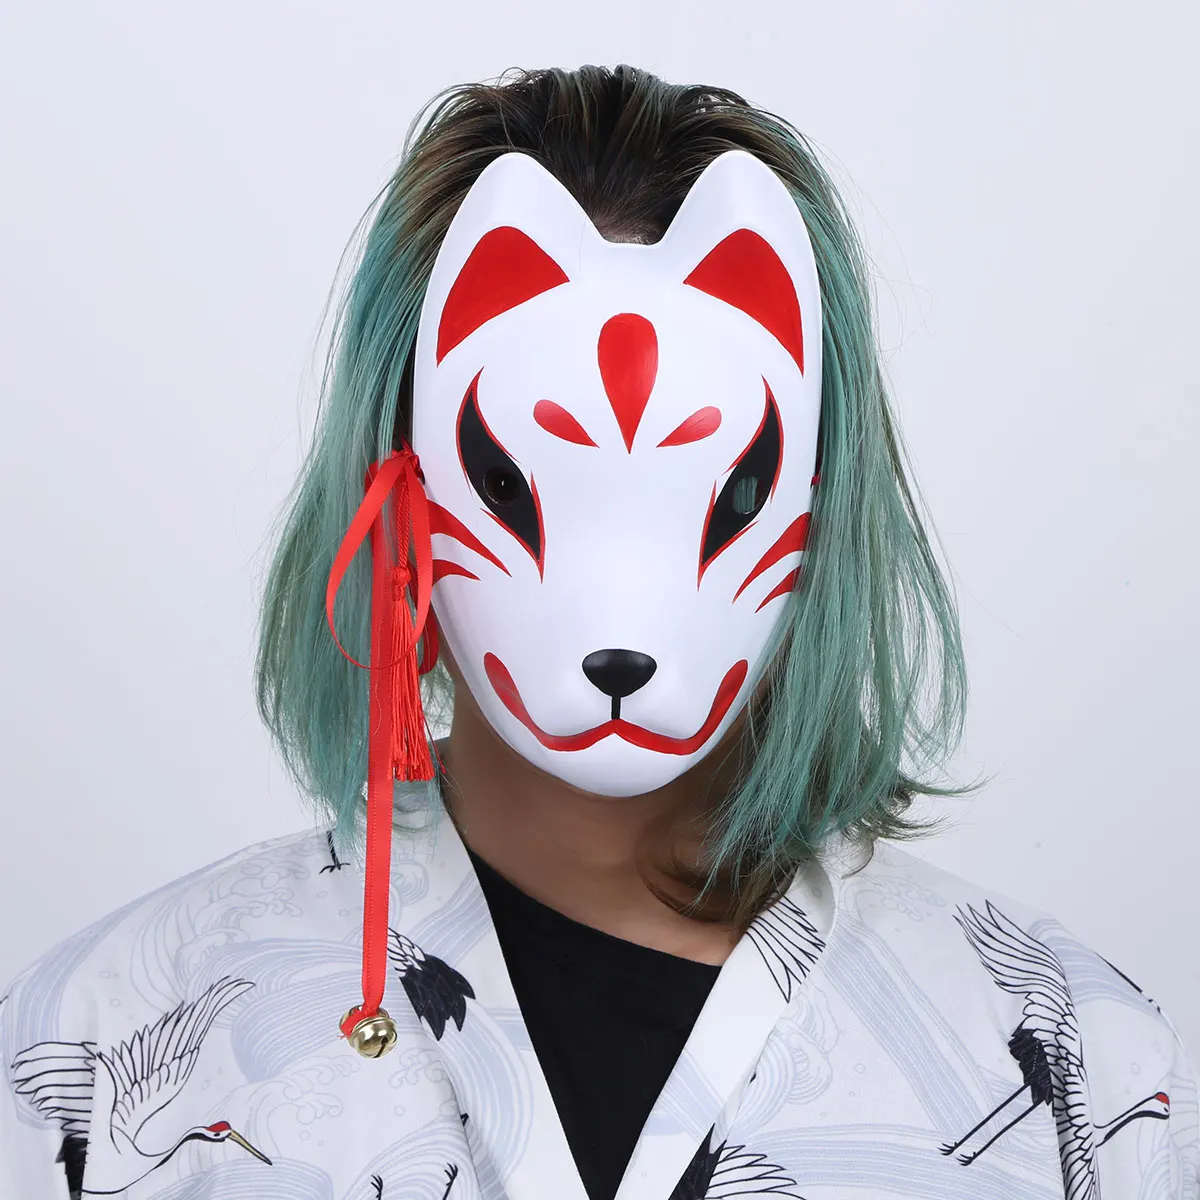 

Hand-painted Japanese Style Full Face Fox Mask with Tassels Masquerade Halloween Festival Rave Anime Cosplay Costume Accessories